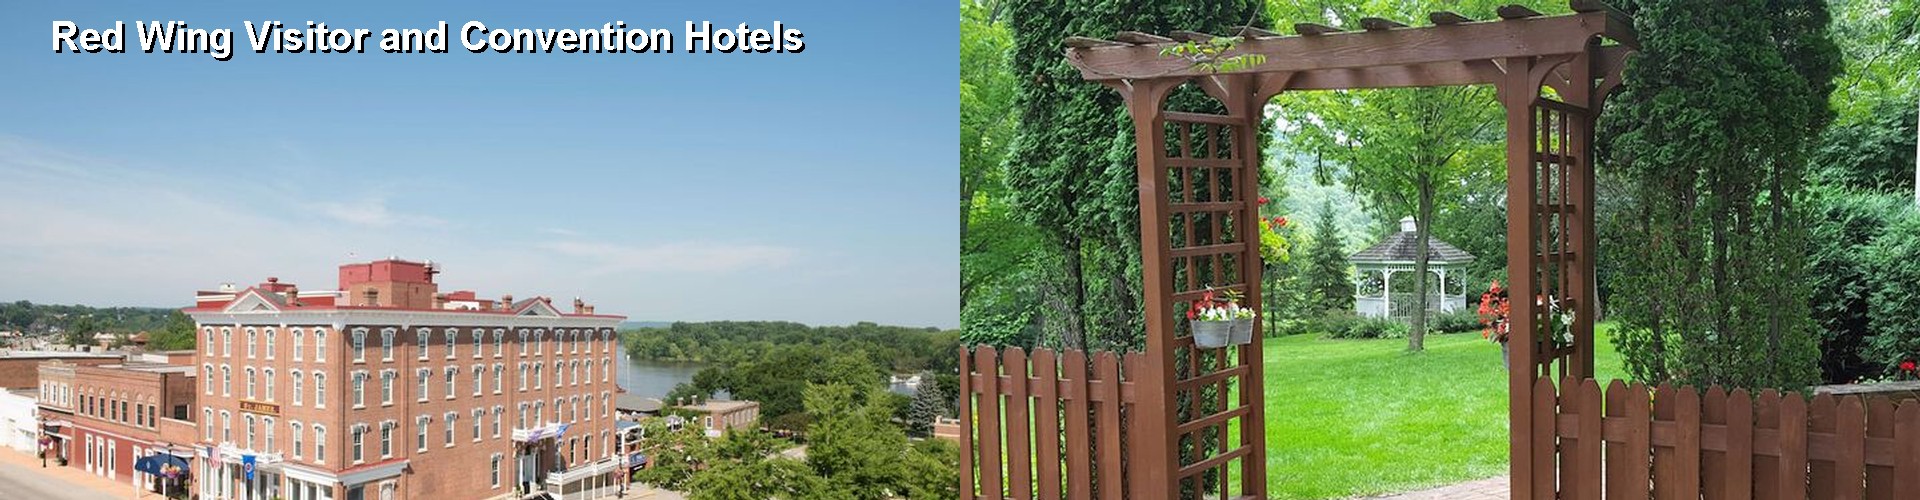 4 Best Hotels near Red Wing Visitor and Convention